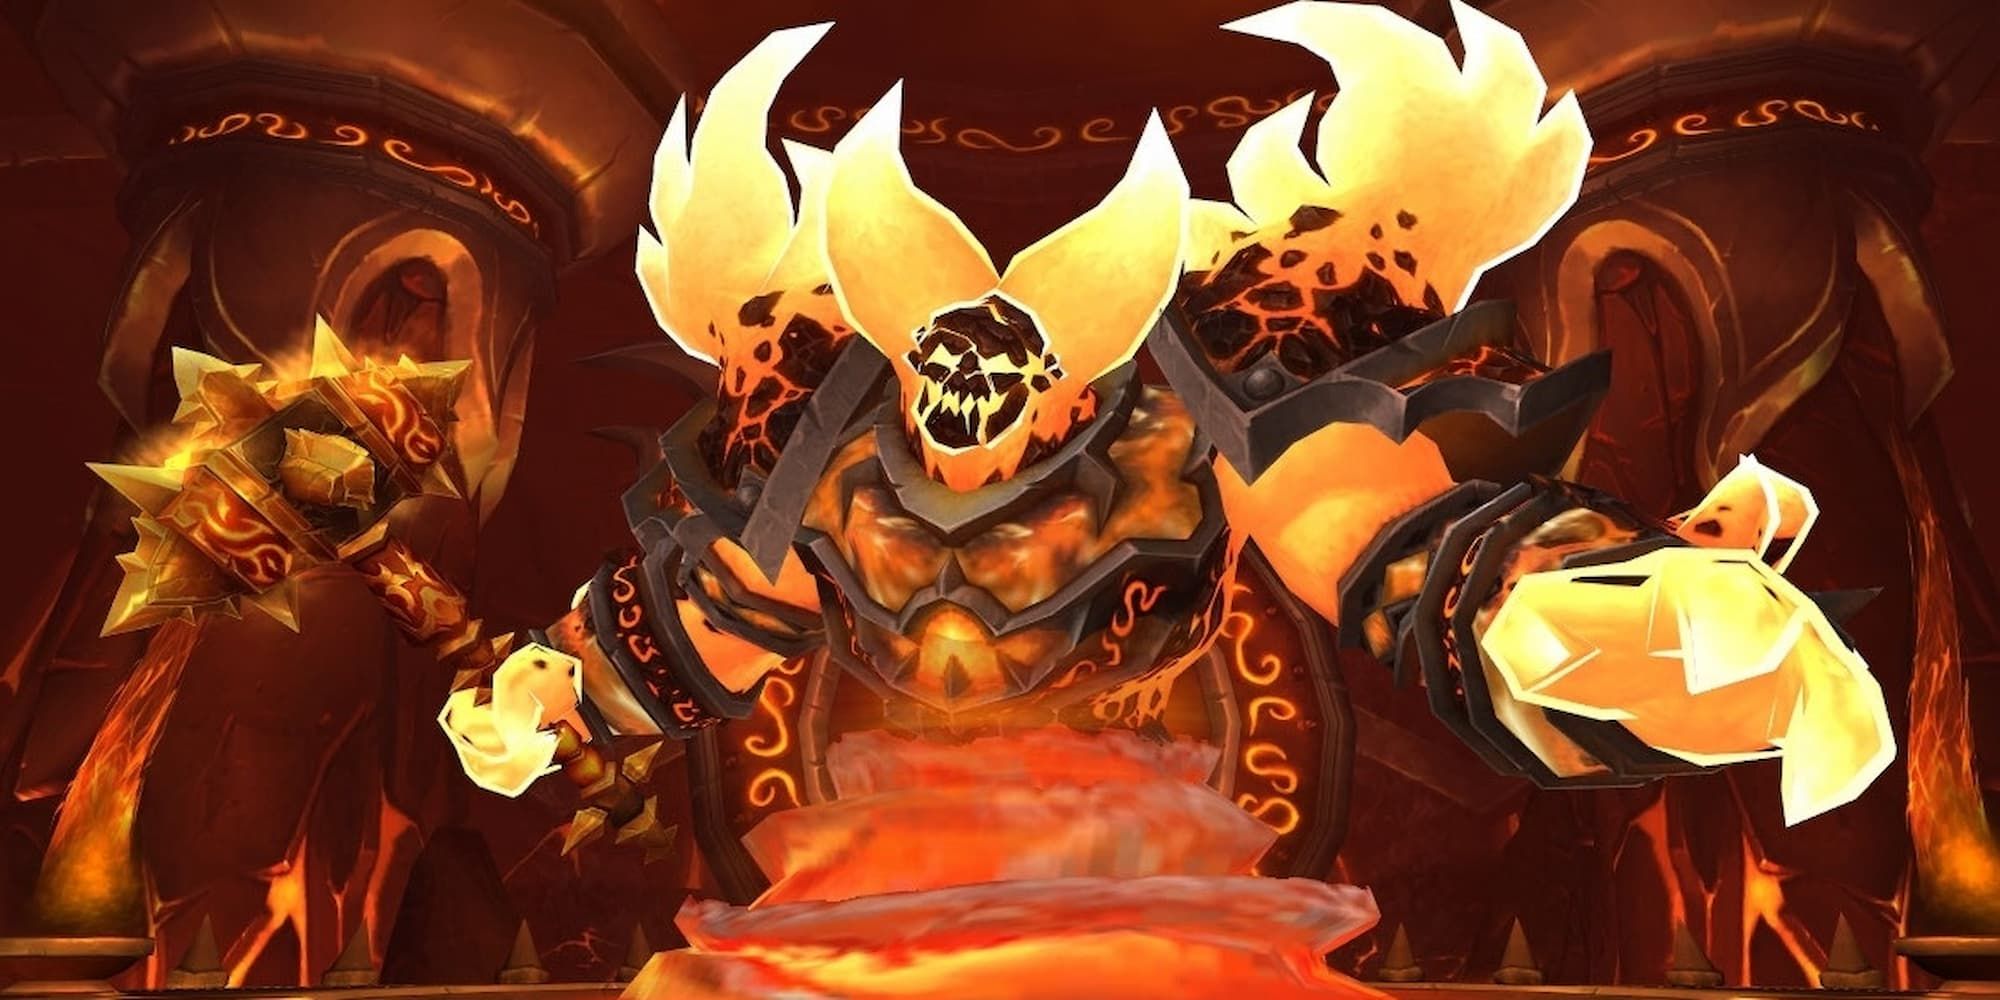 Ragnaros the Fire Lord emerges from his lair with his hammer in hand.